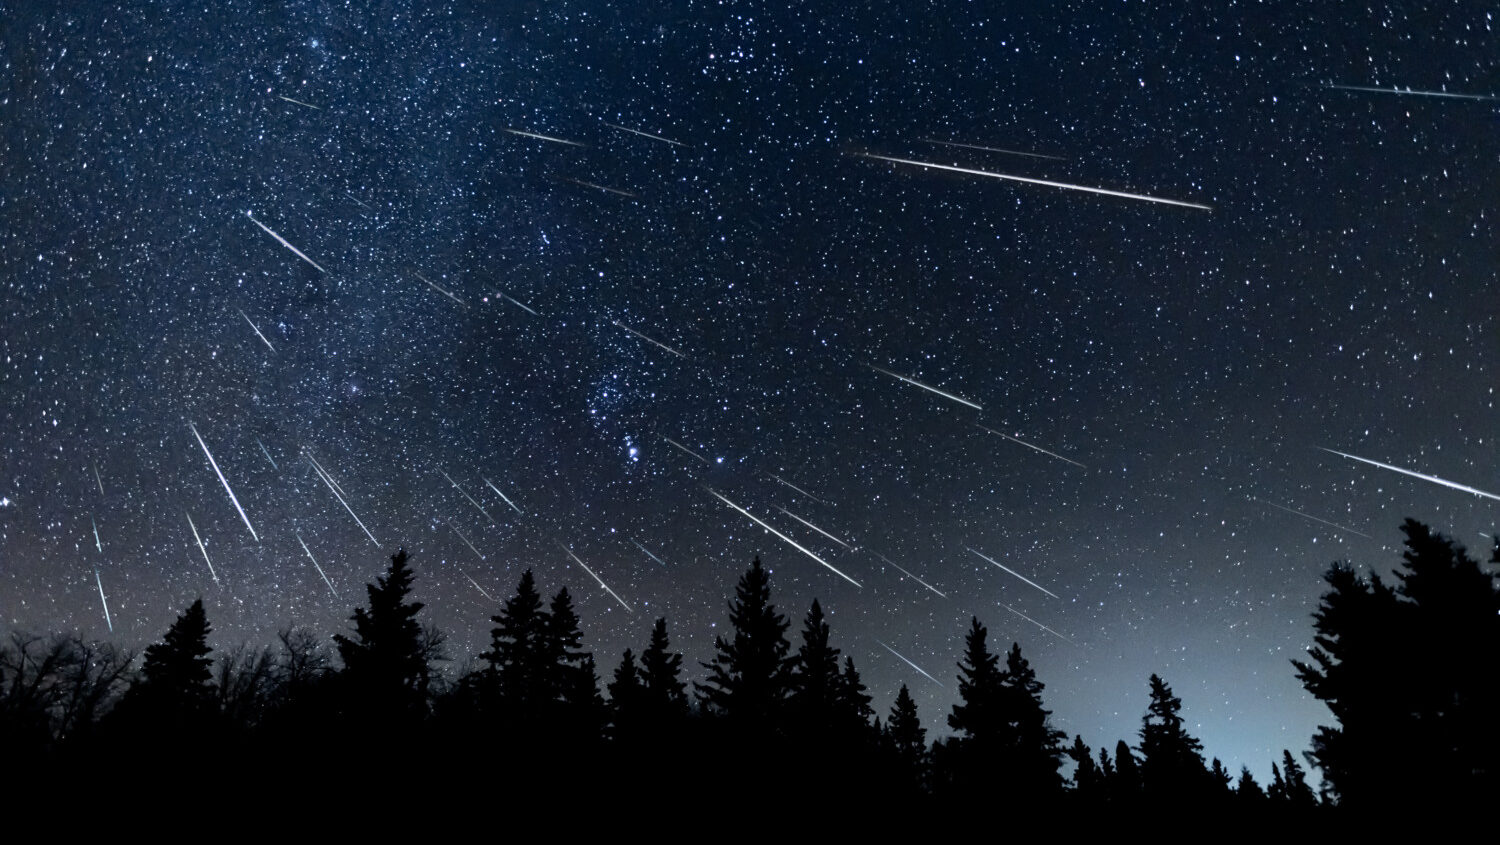 When to see December’s Geminids meteor shower